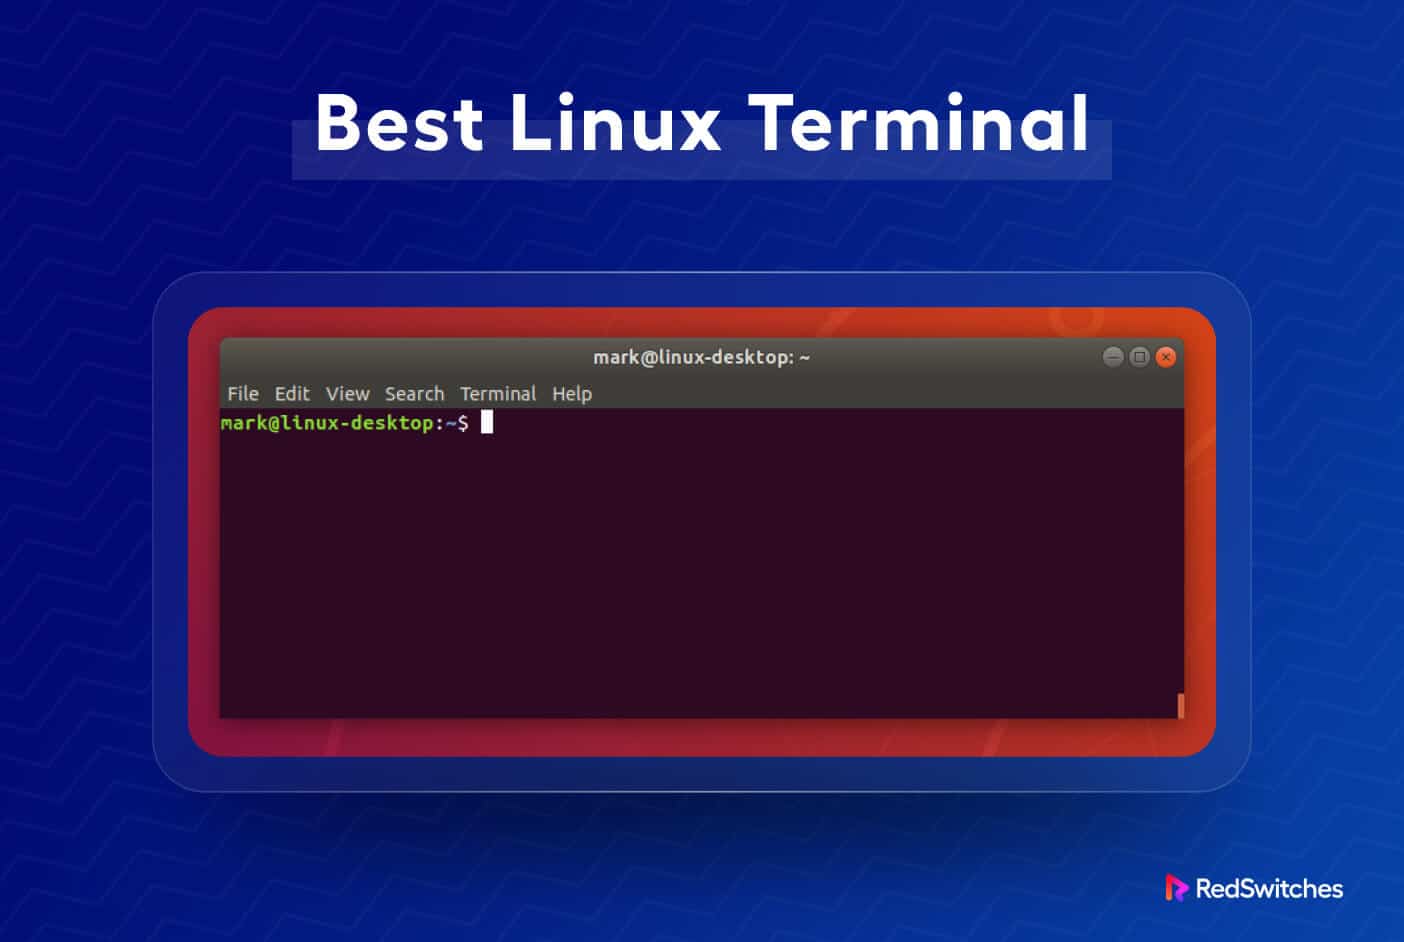 10 Best Linux Terminal: Features And Recommendations